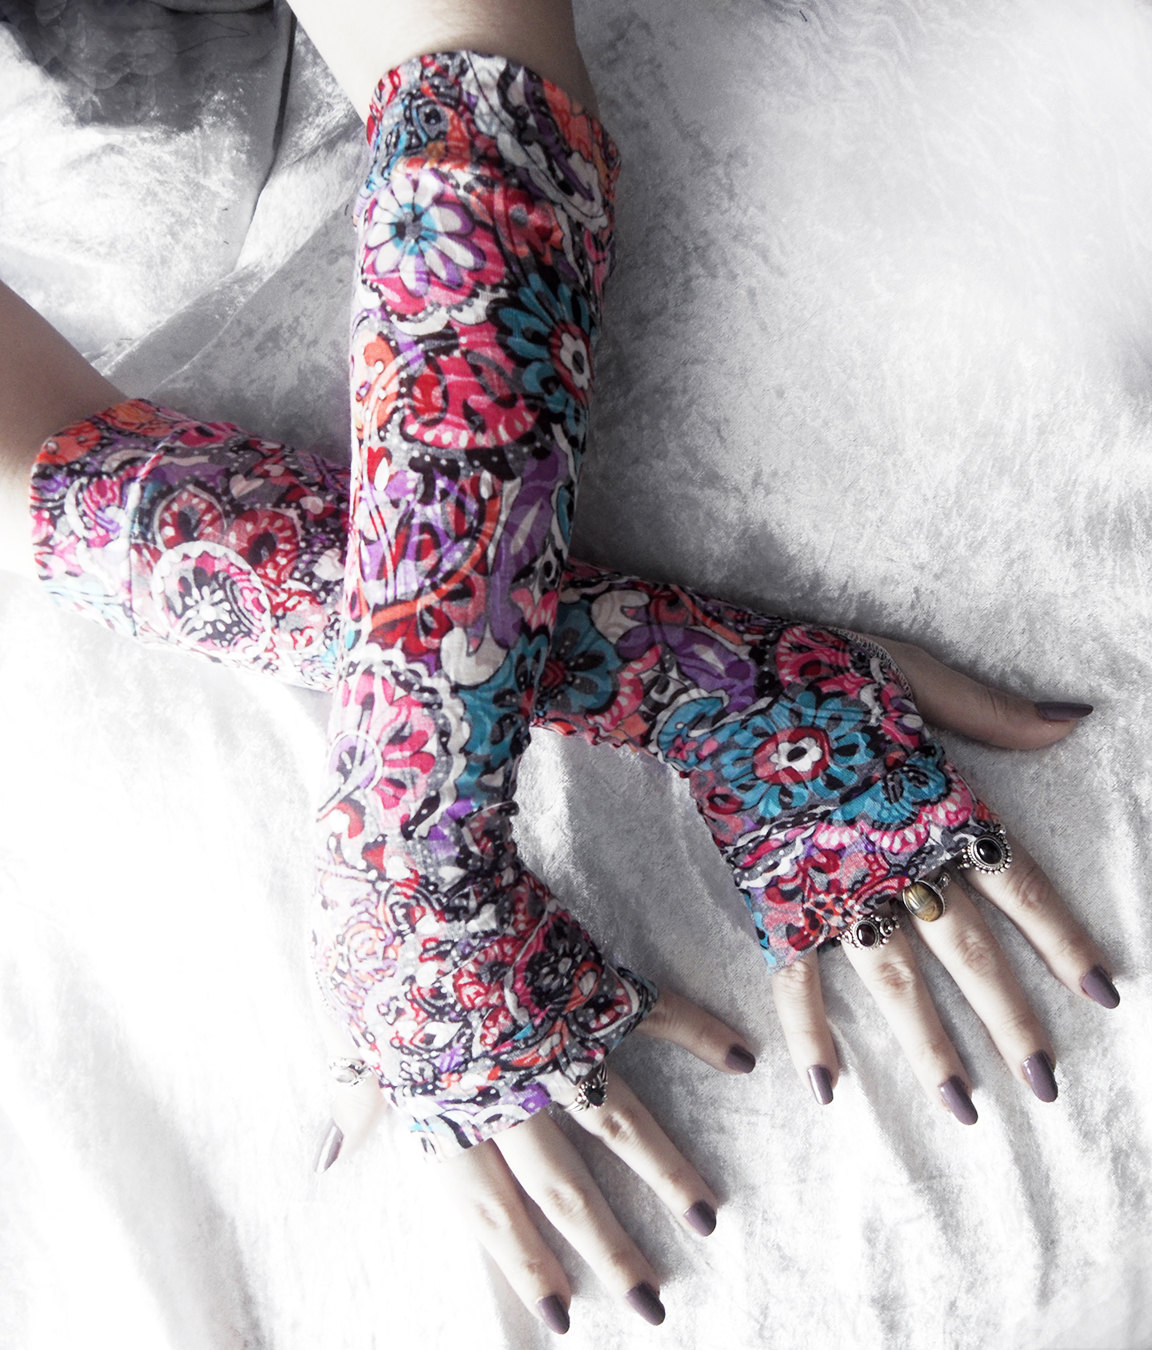 Urban Garden Arm Warmers - Purple Turquoise Blue Orange Black Red Pink Floral White - Yoga Gothic Gypsy Bohemian Cycling Light Boho Goth steampunk buy now online